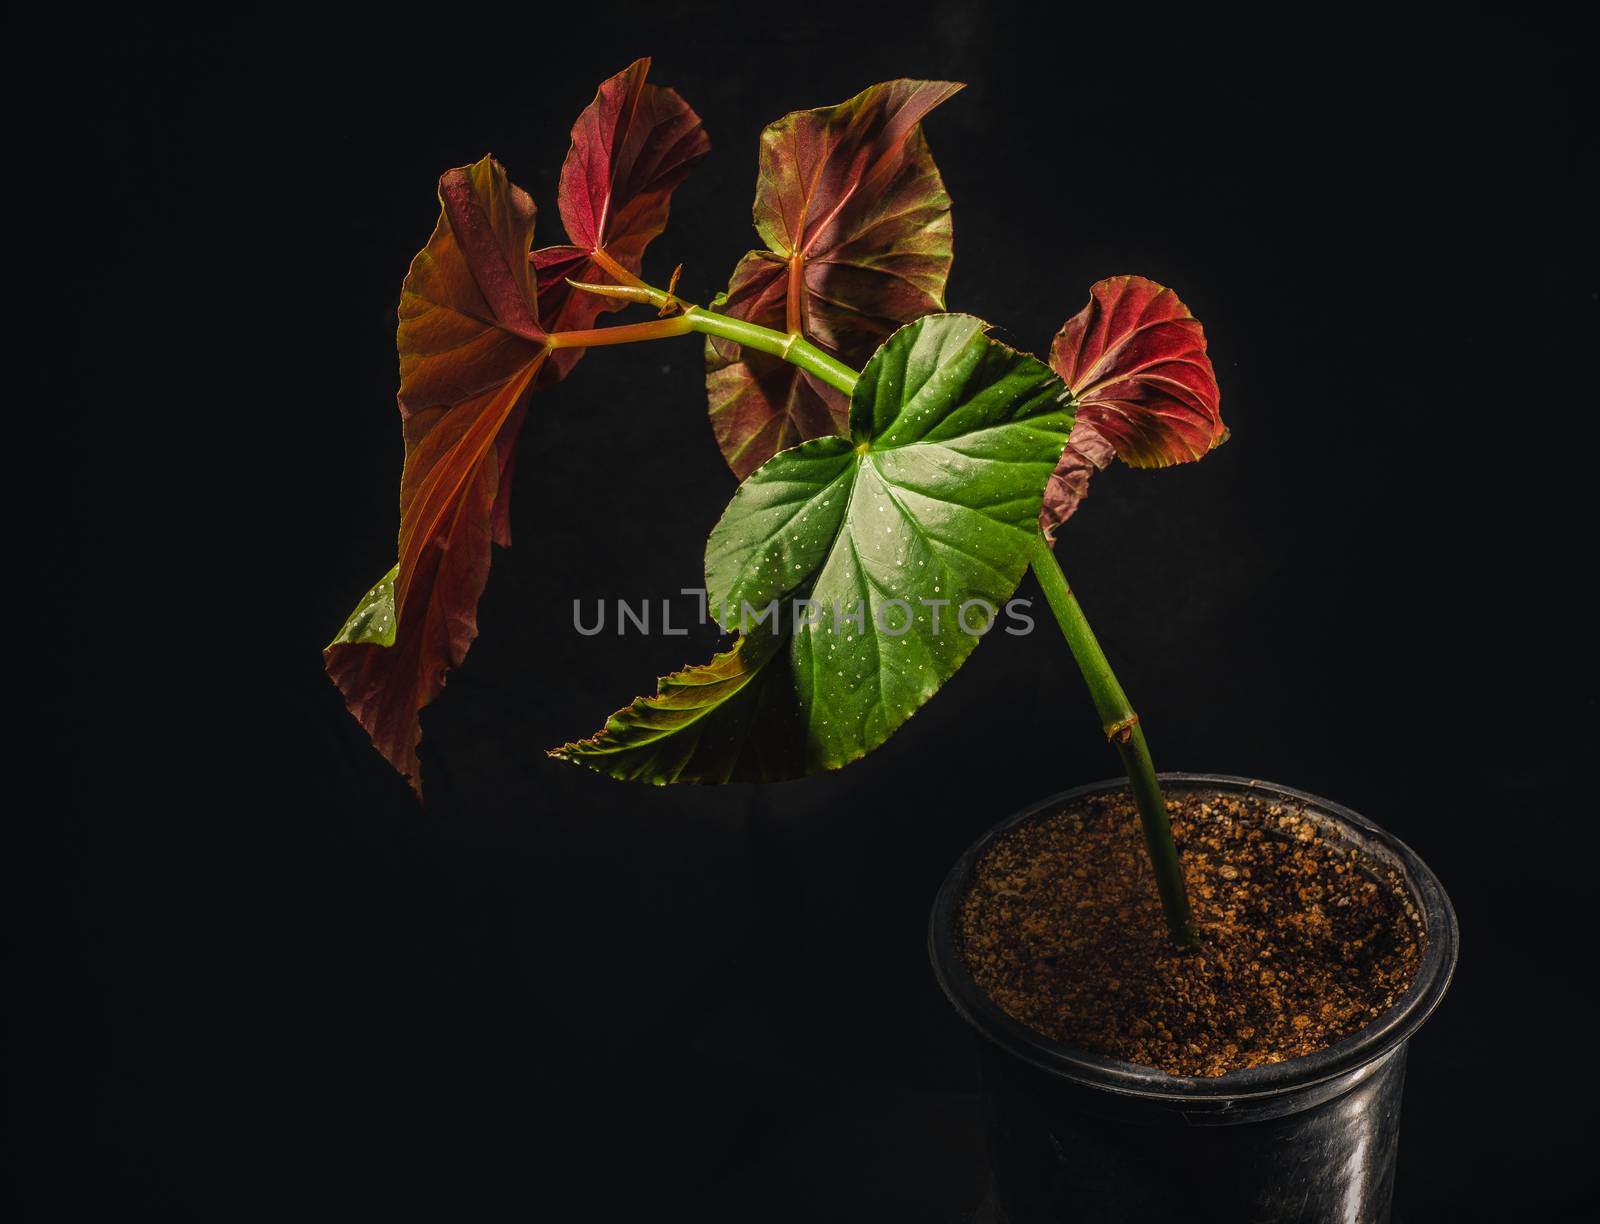 Begonia lucerna or angel wing begonia is a common flowering houseplant by Pendleton